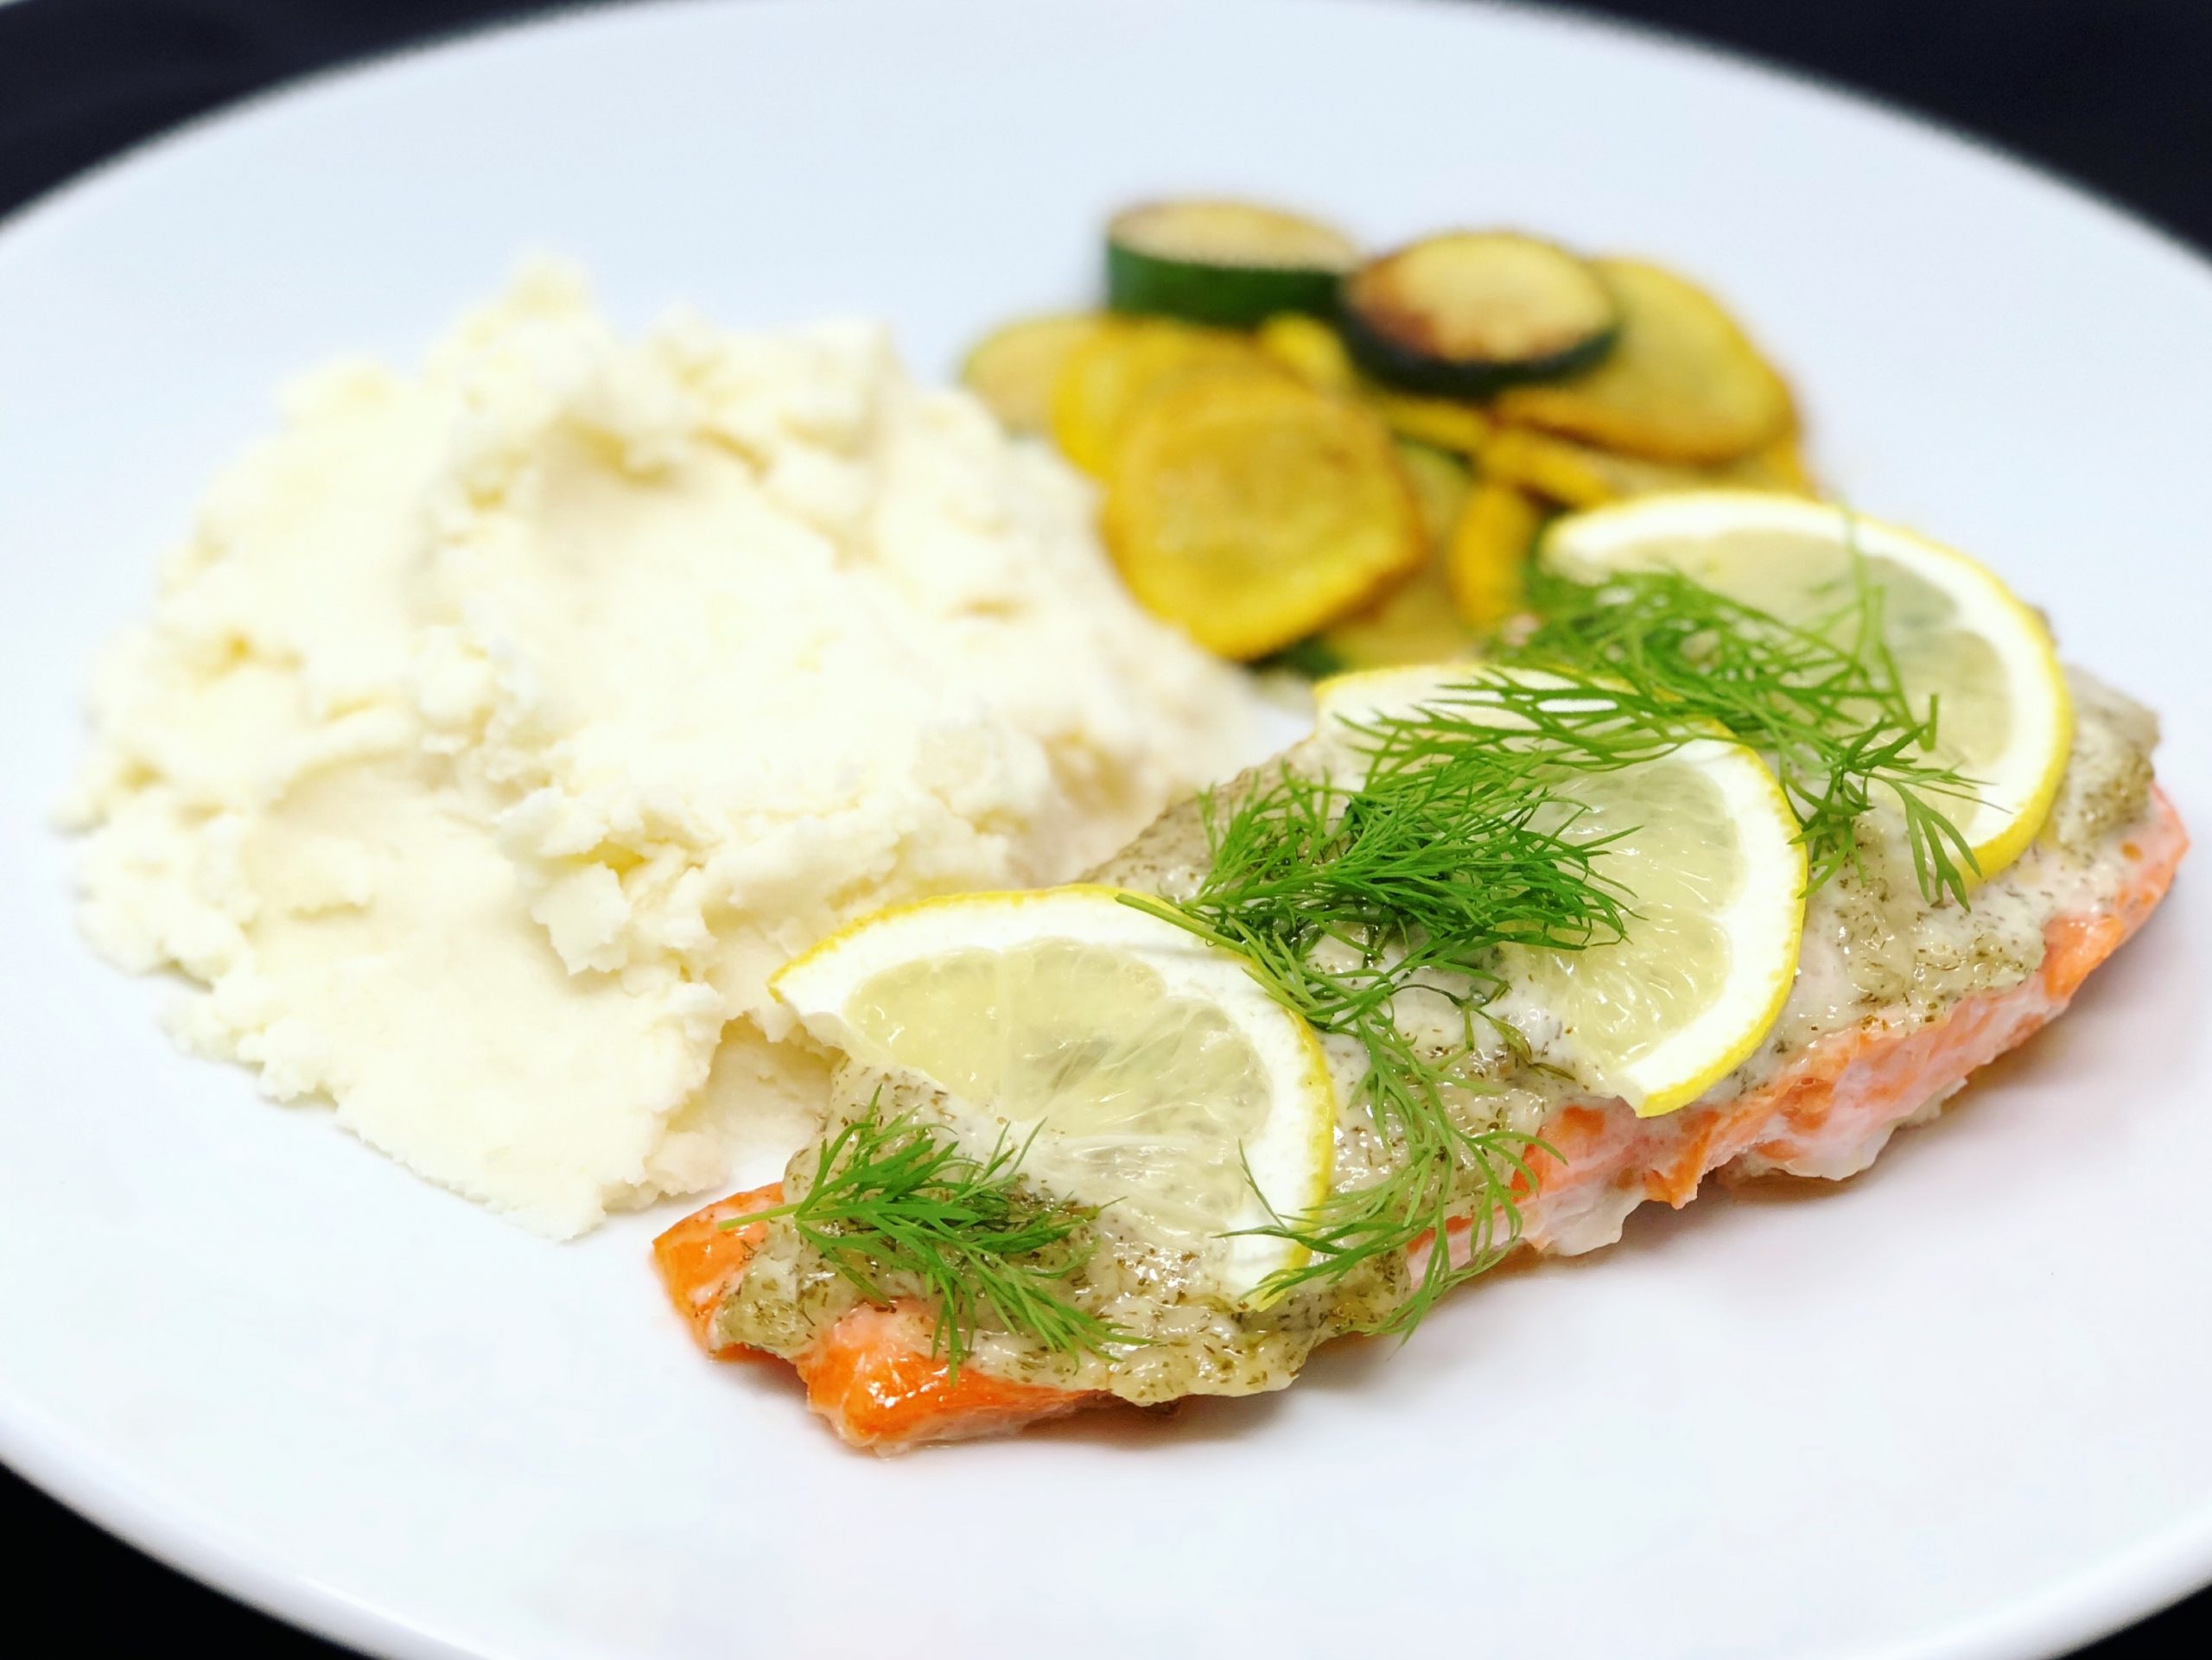 Dish of Baked Salmon with Dill Garlic Spread and Lemon